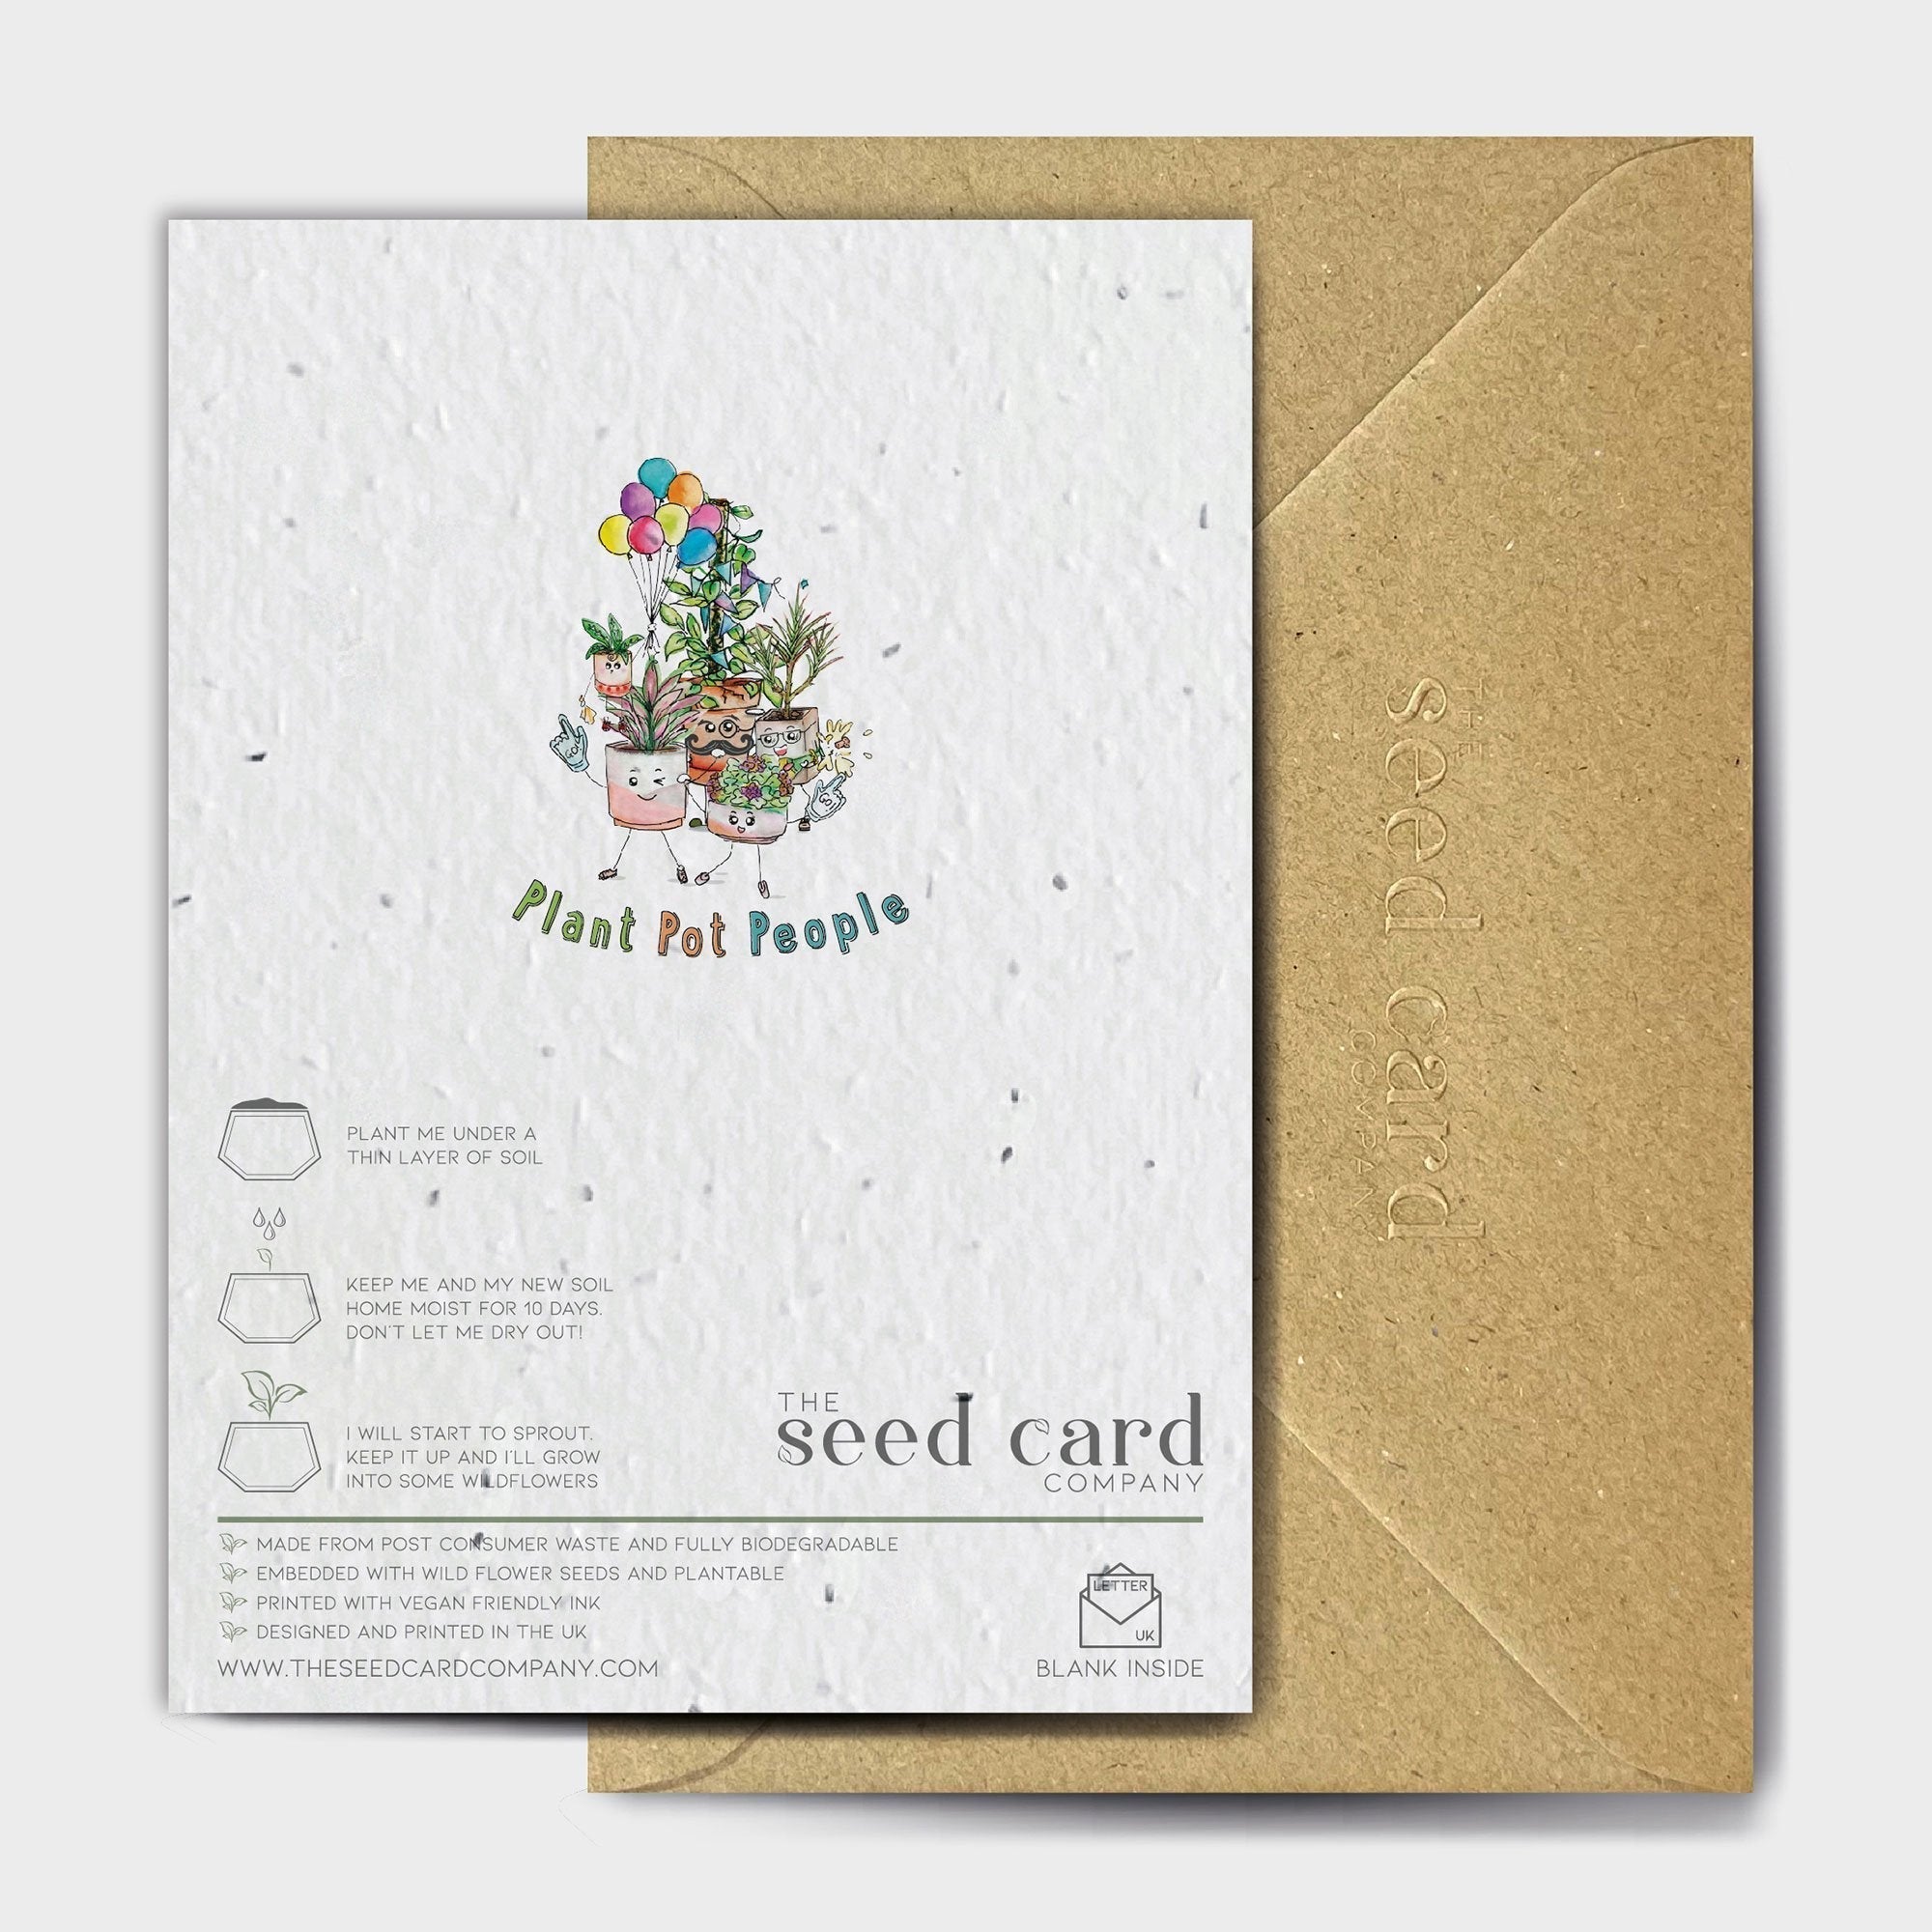 Shop online Like Father Like Son - 100% biodegradable seed-embedded cards Shop -The Seed Card Company